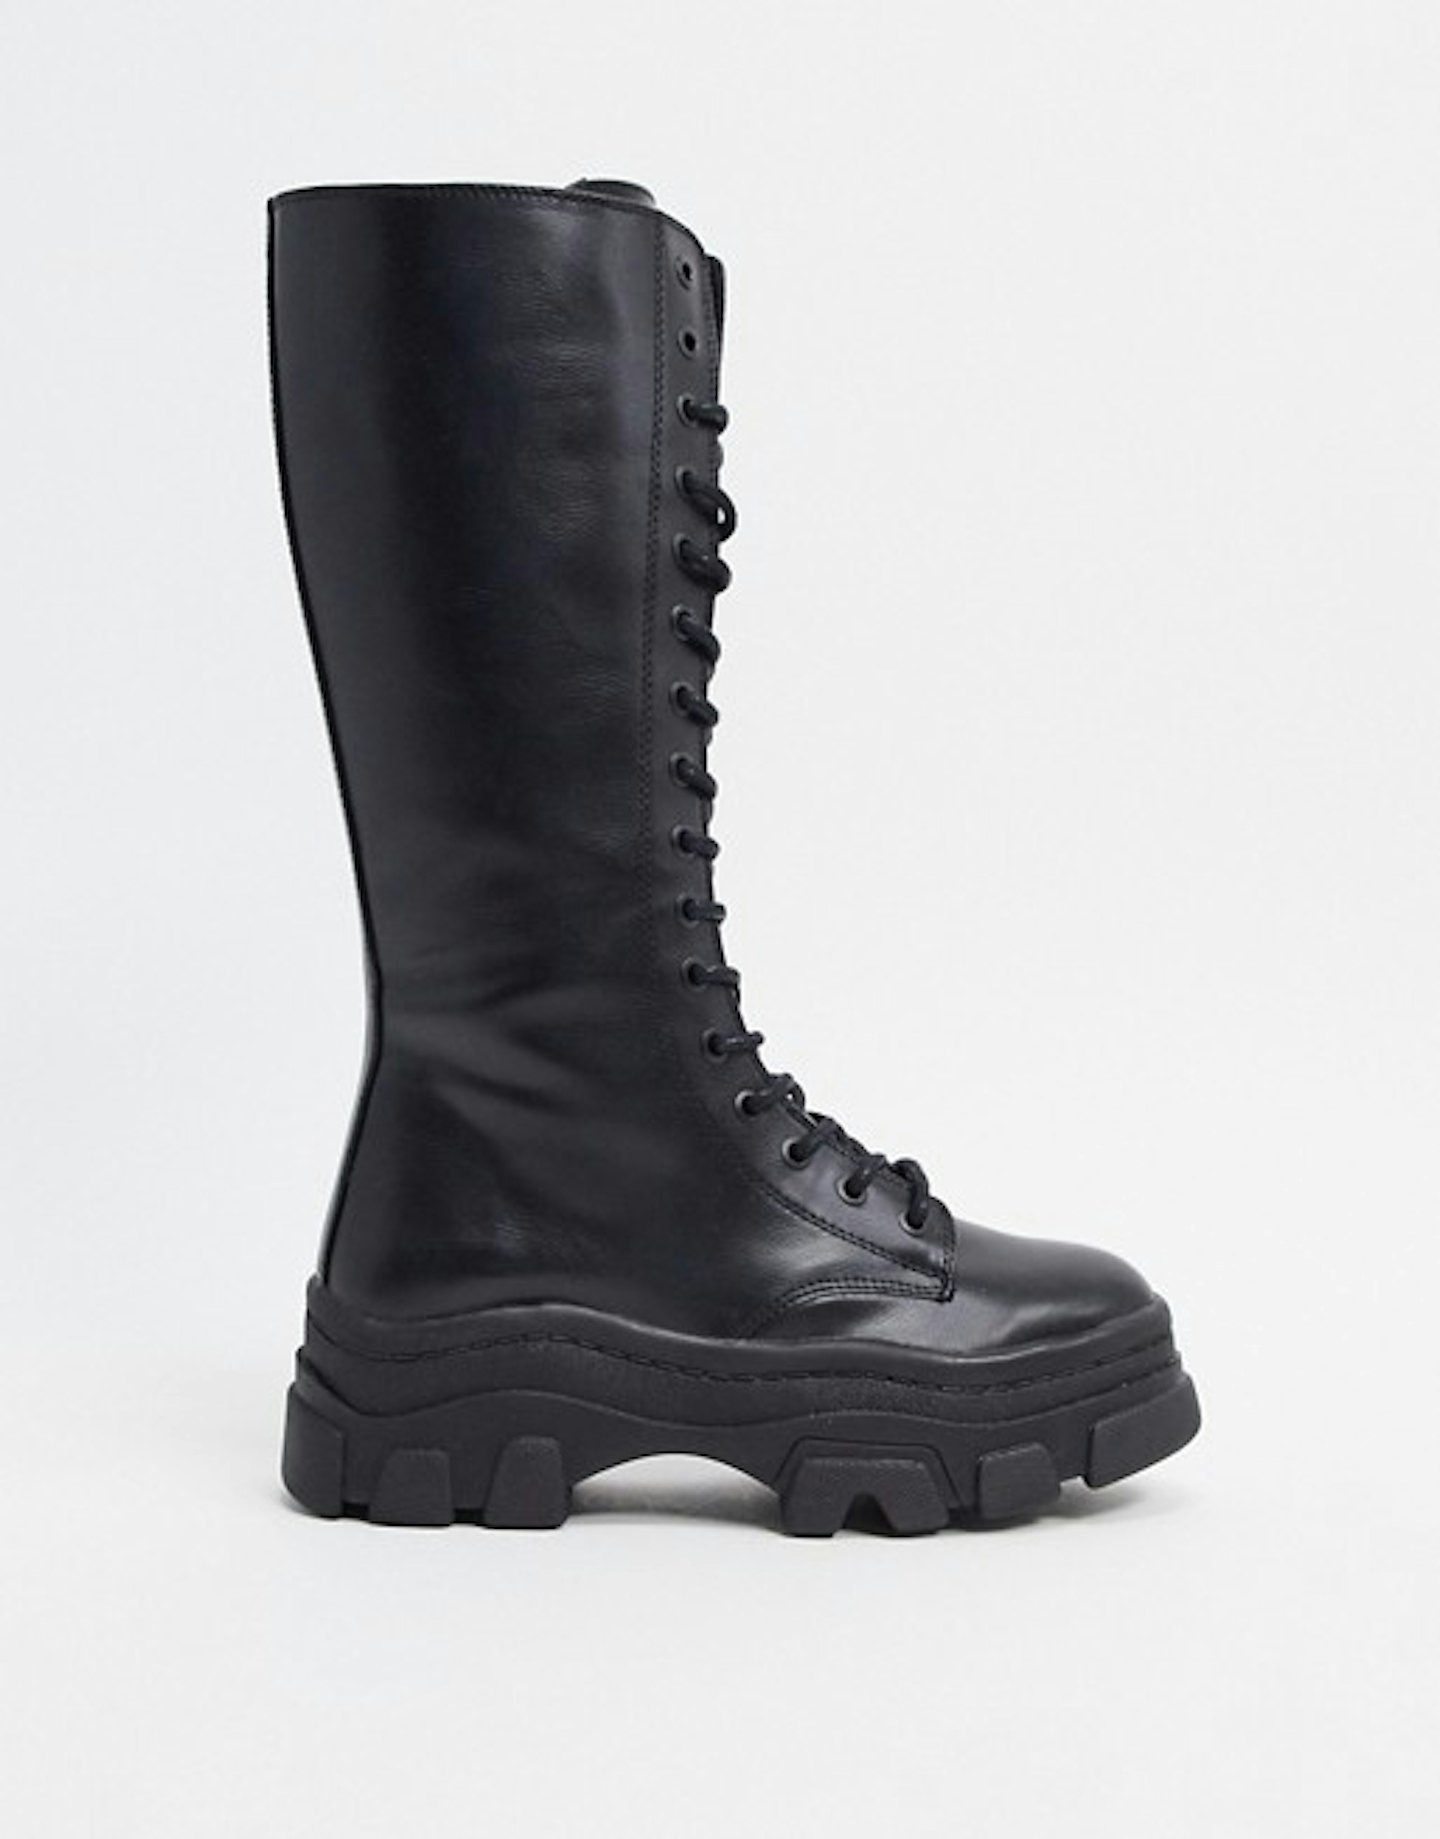 Bershka, high lace up boots with track sole in black. £59.99